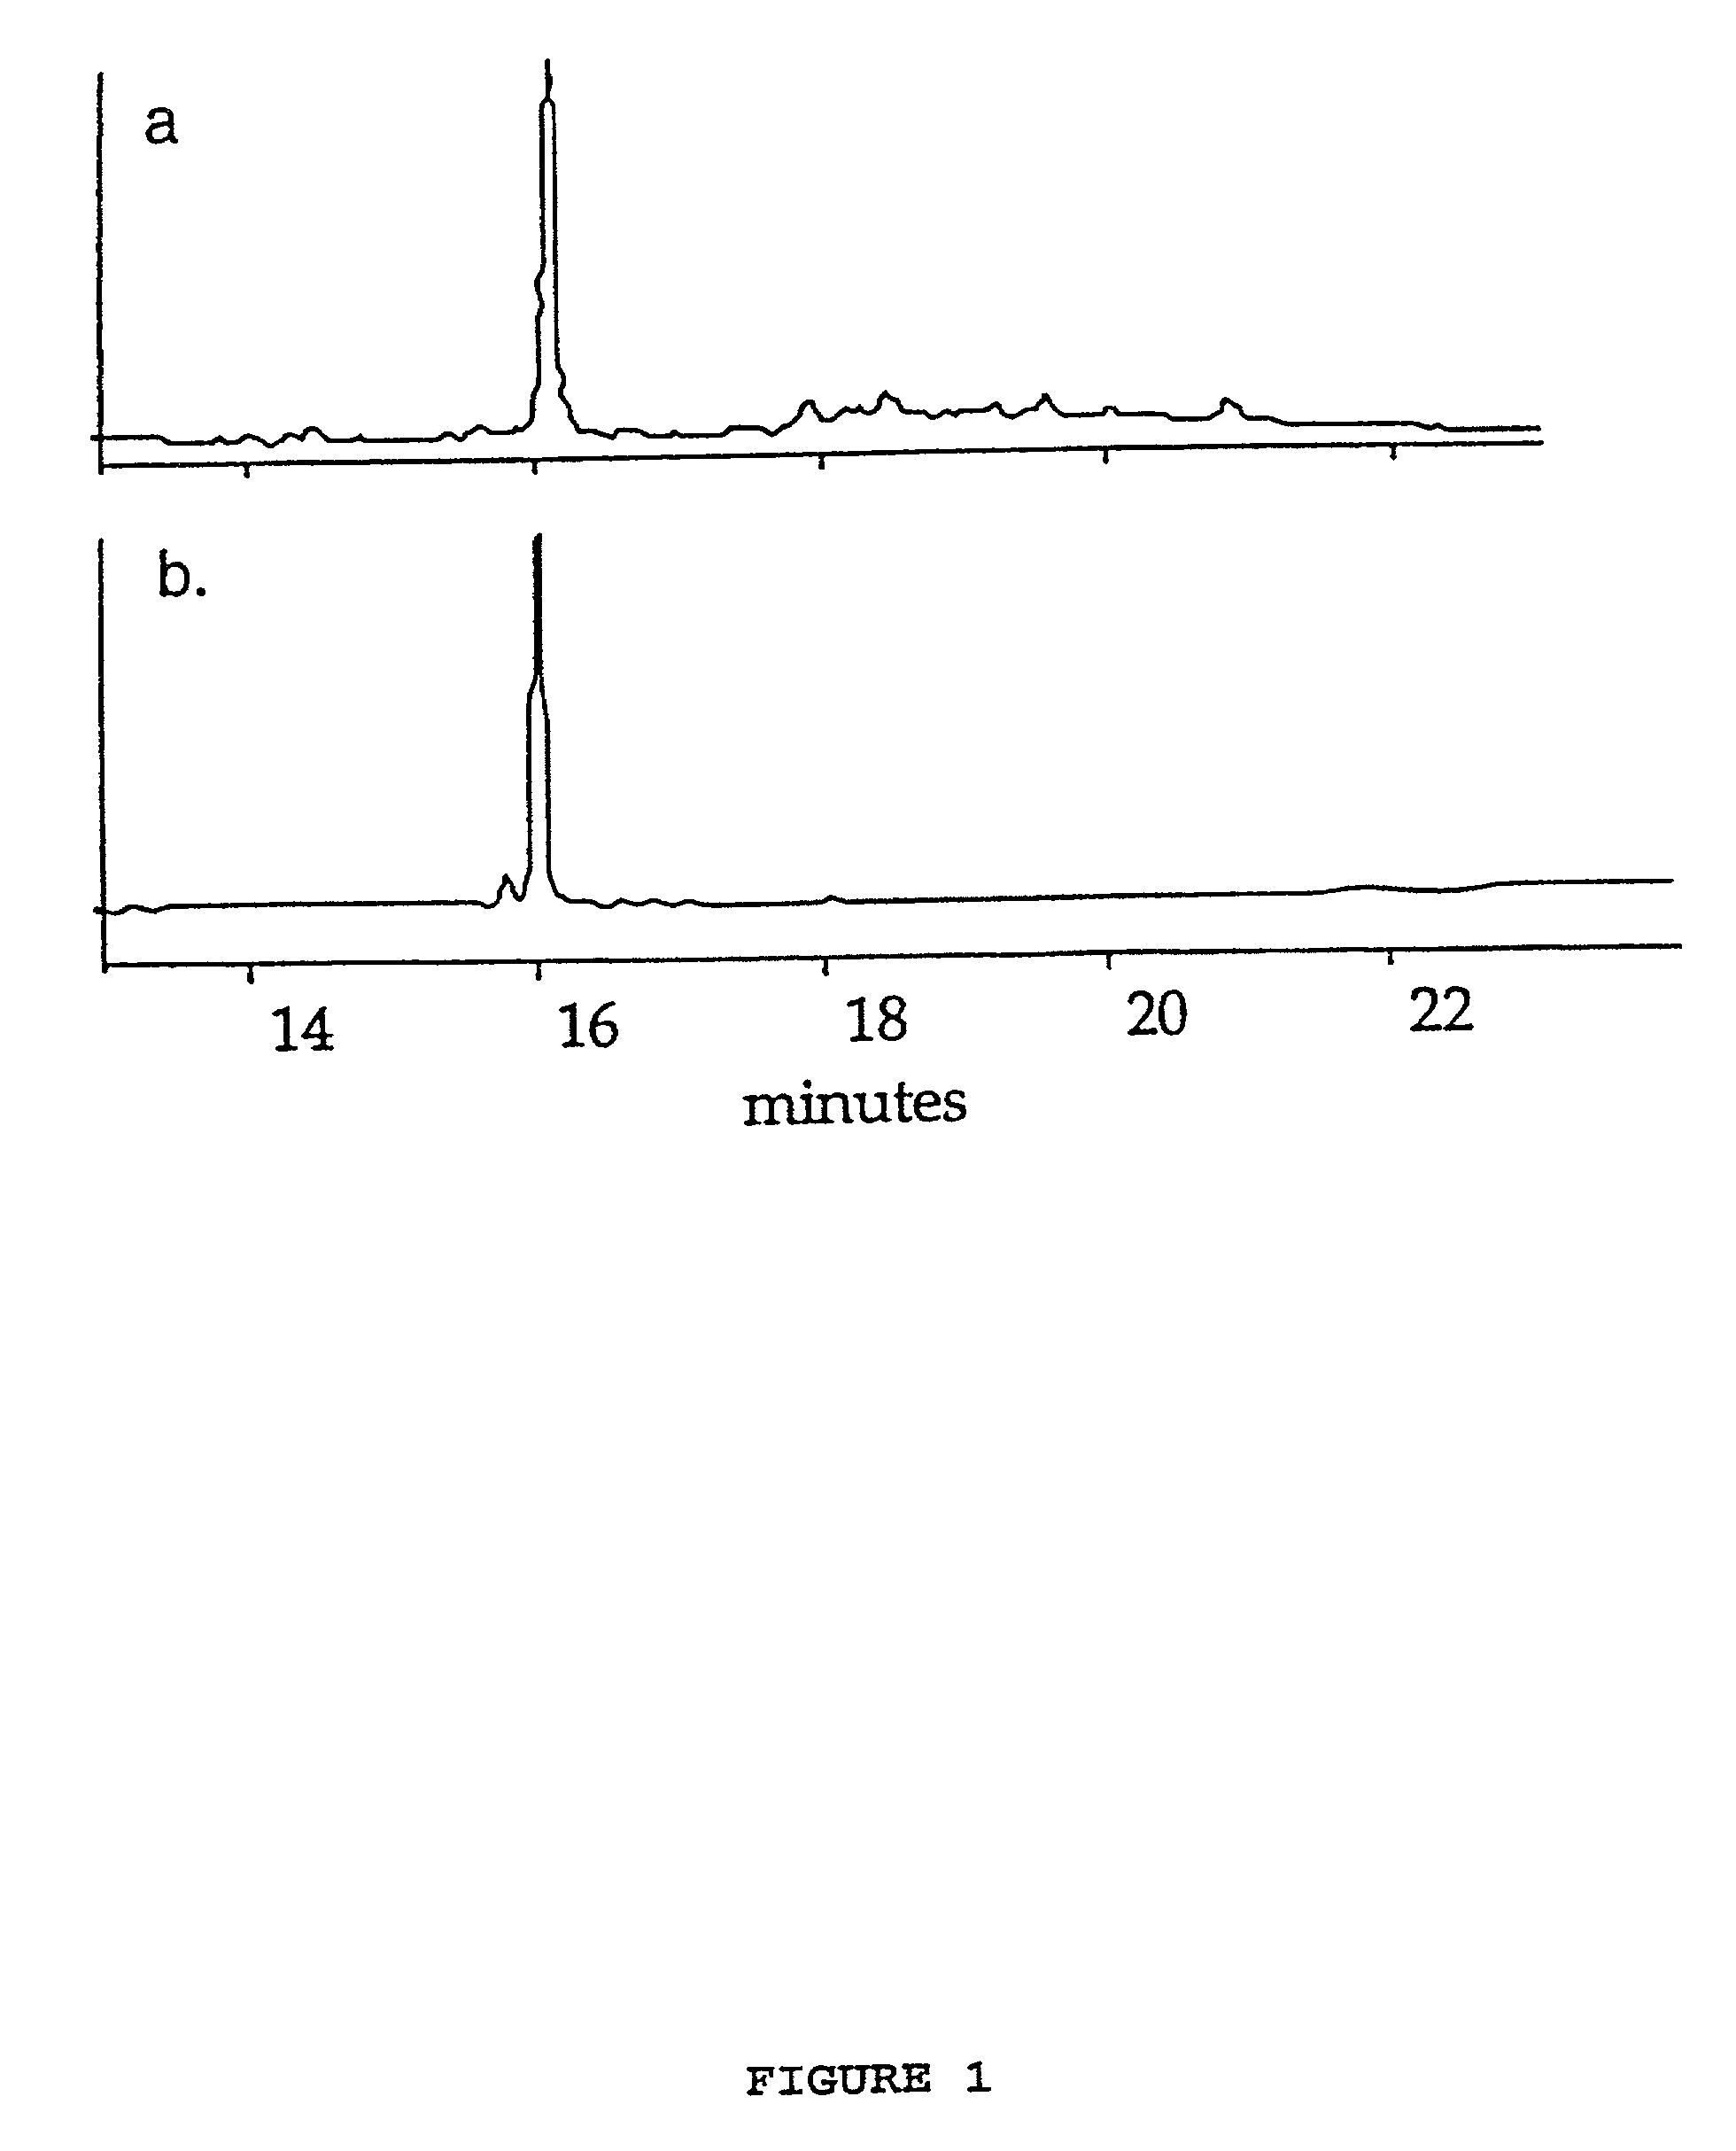 Synthesis of cyclic peptides